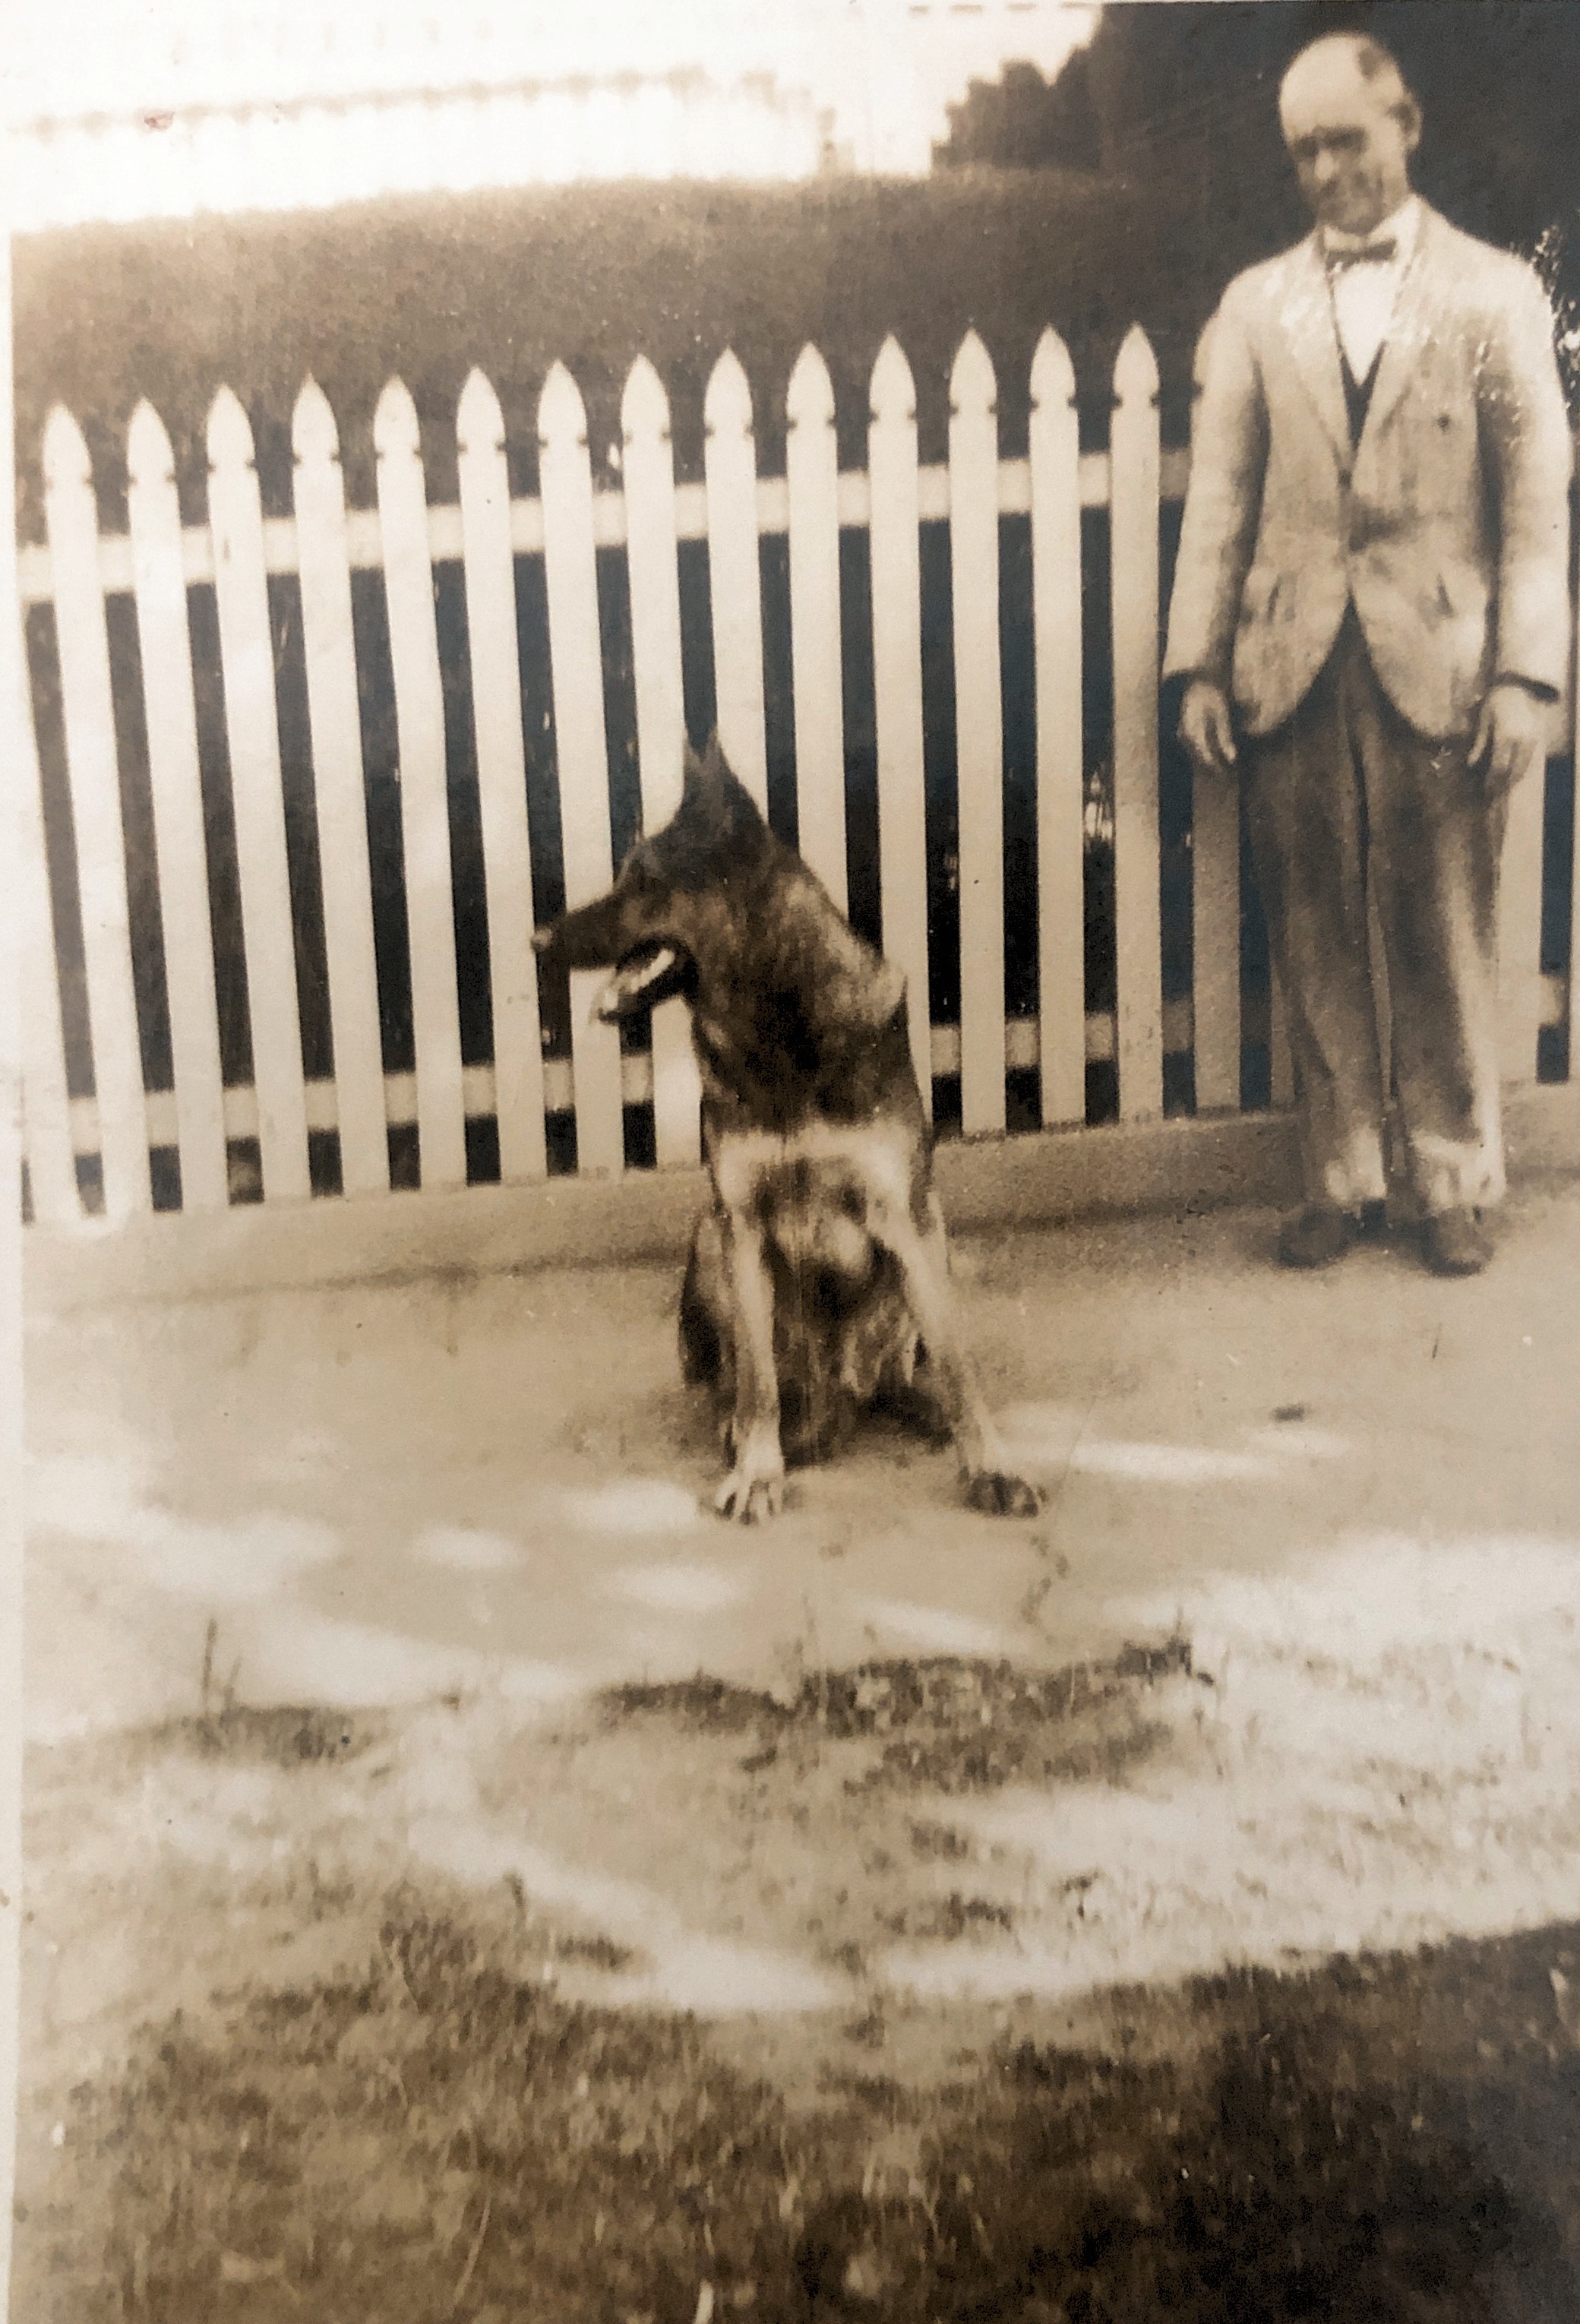 Sydney Le Plastrier with Pat in Richardson St Albert Park 1940ish . Pat belonged to Les Le Plastrier and went to war as a service dog.